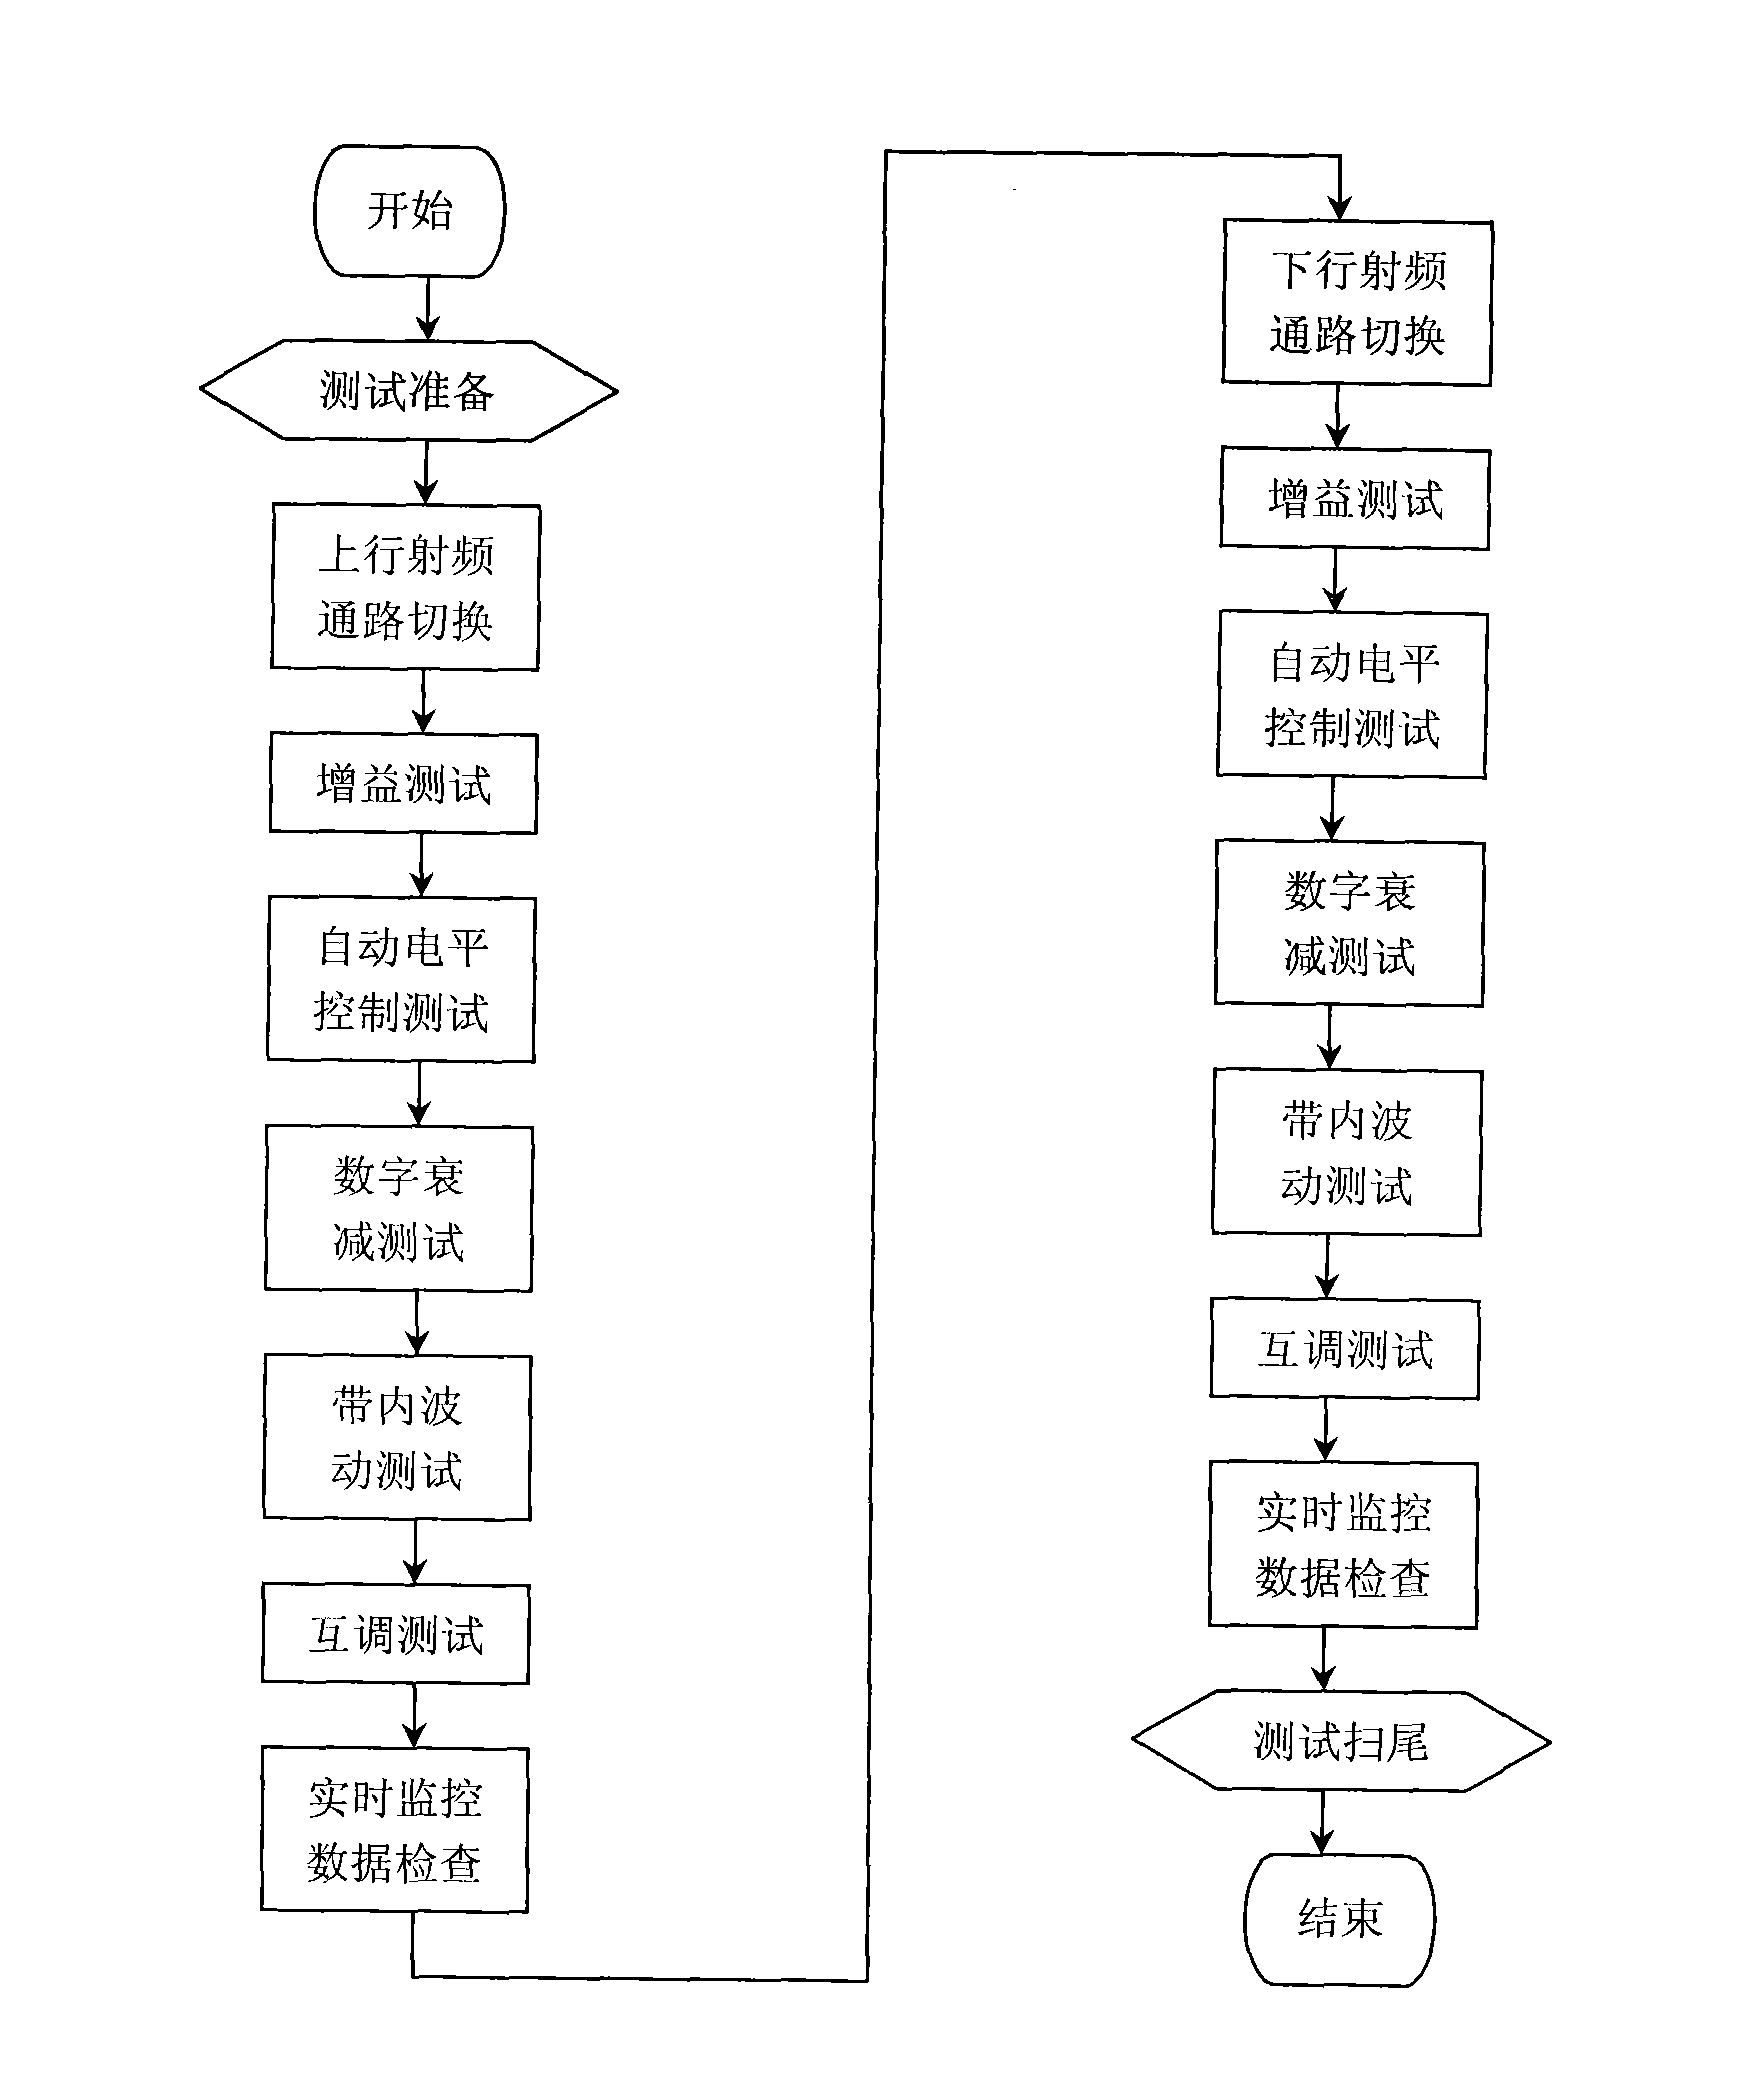 Automatic detection method aiming at GSM trunk amplifying